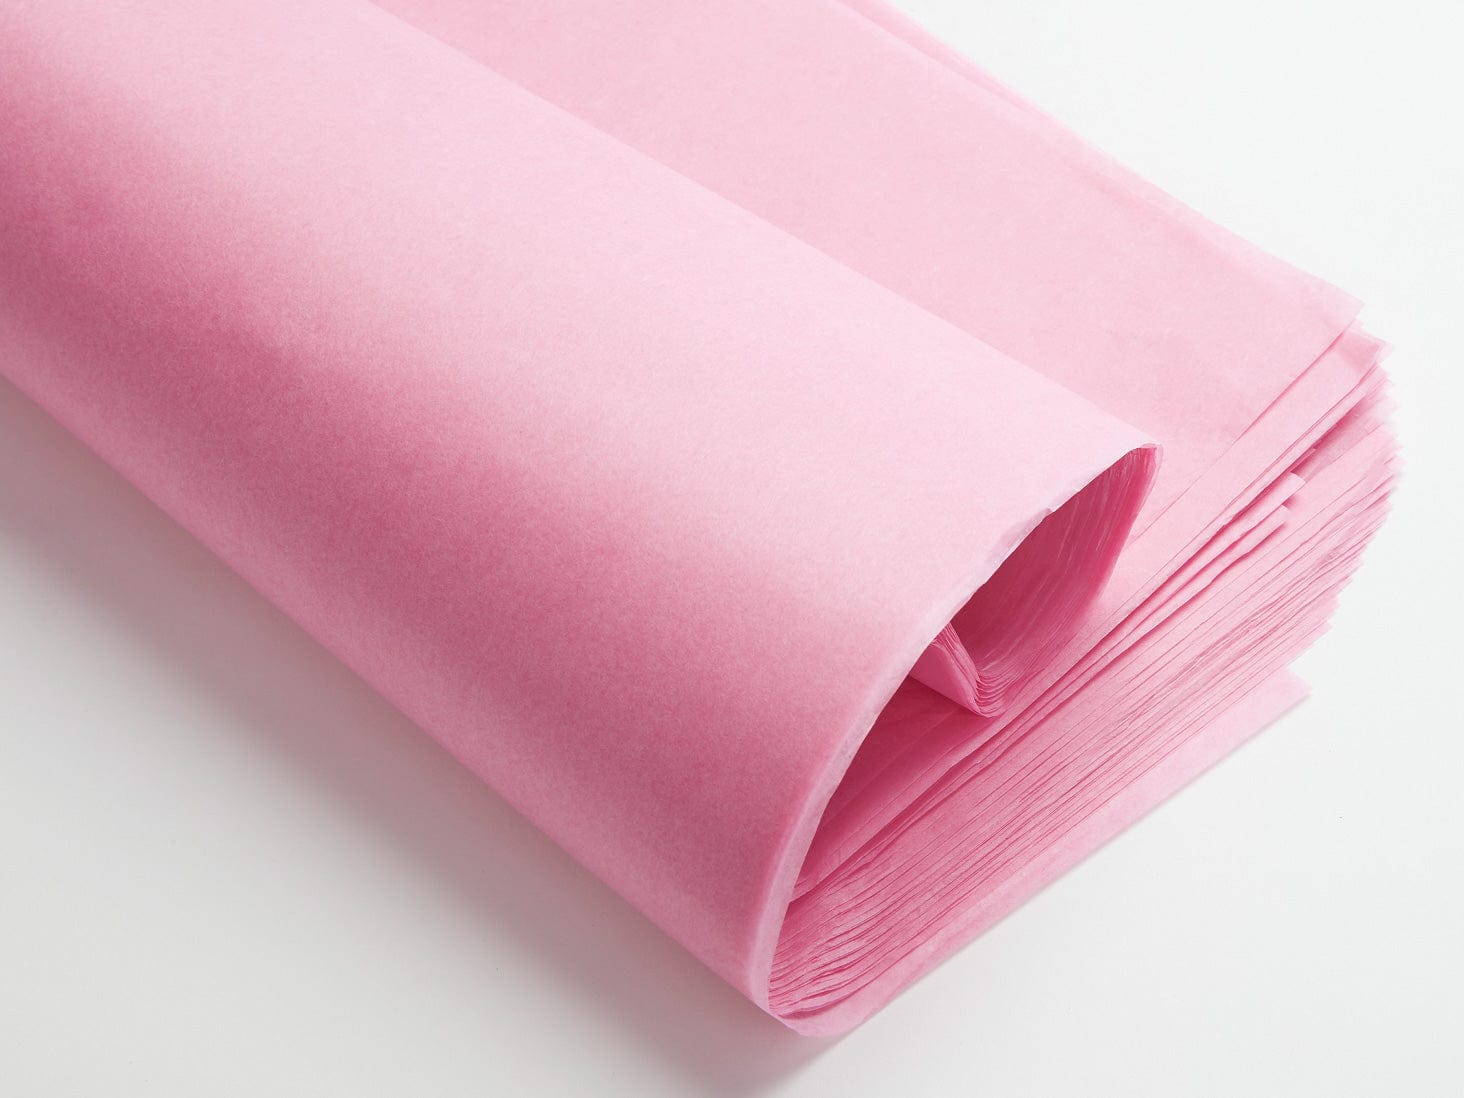 Rose Pink Luxury Tissue Paper 96 Sheets